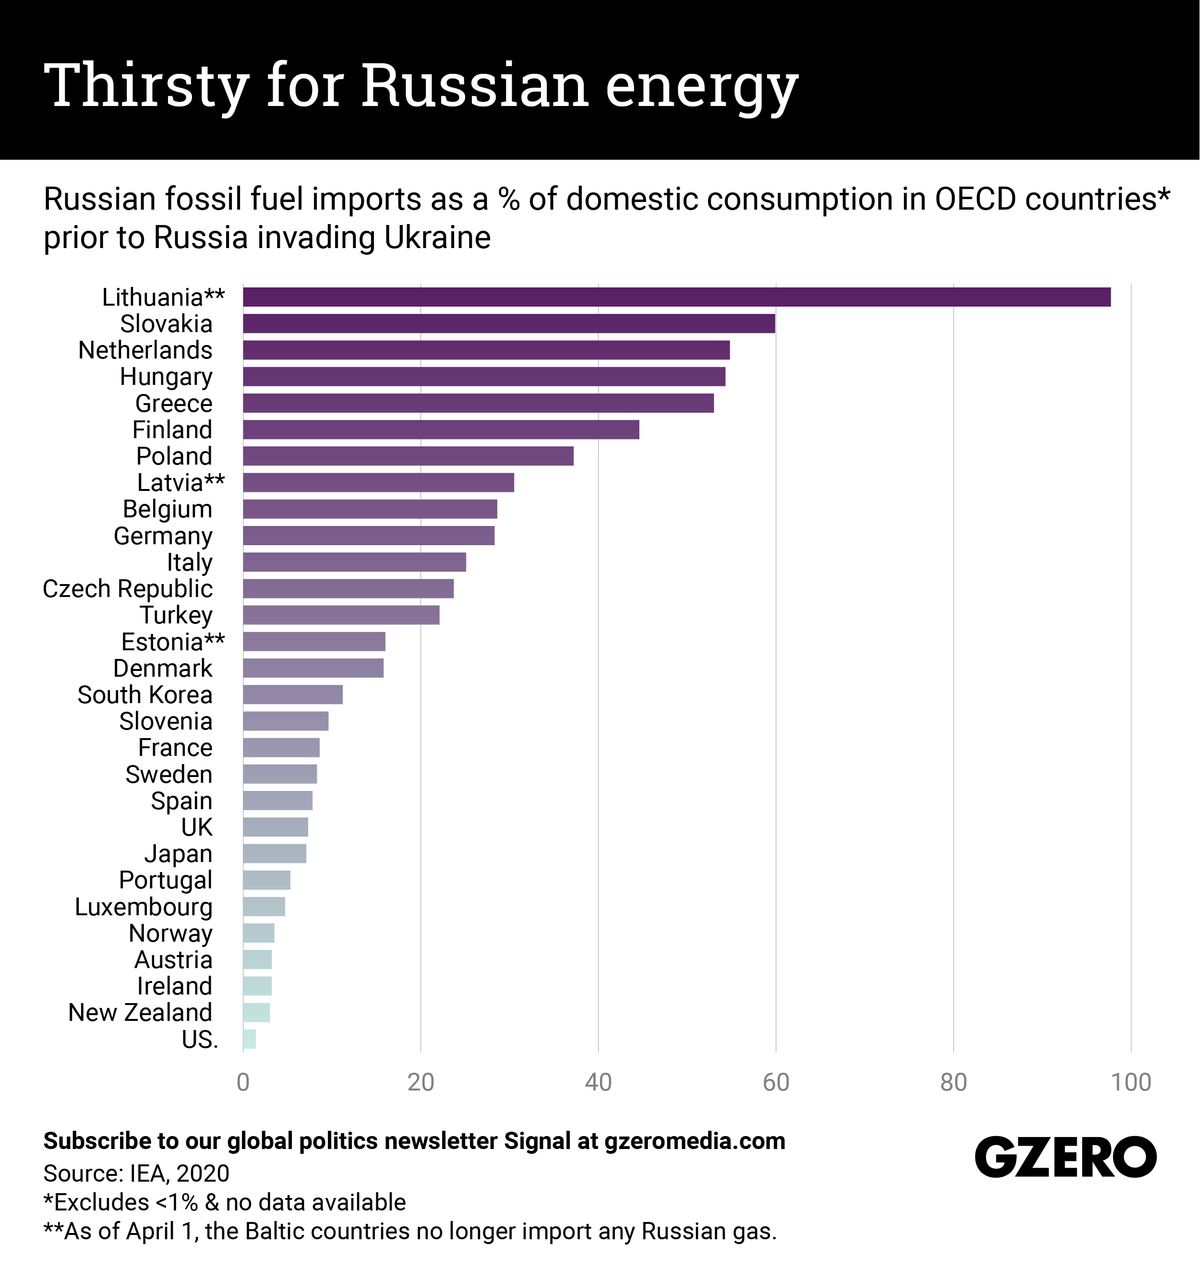 The Graphic Truth: Thirsty for Russian energy